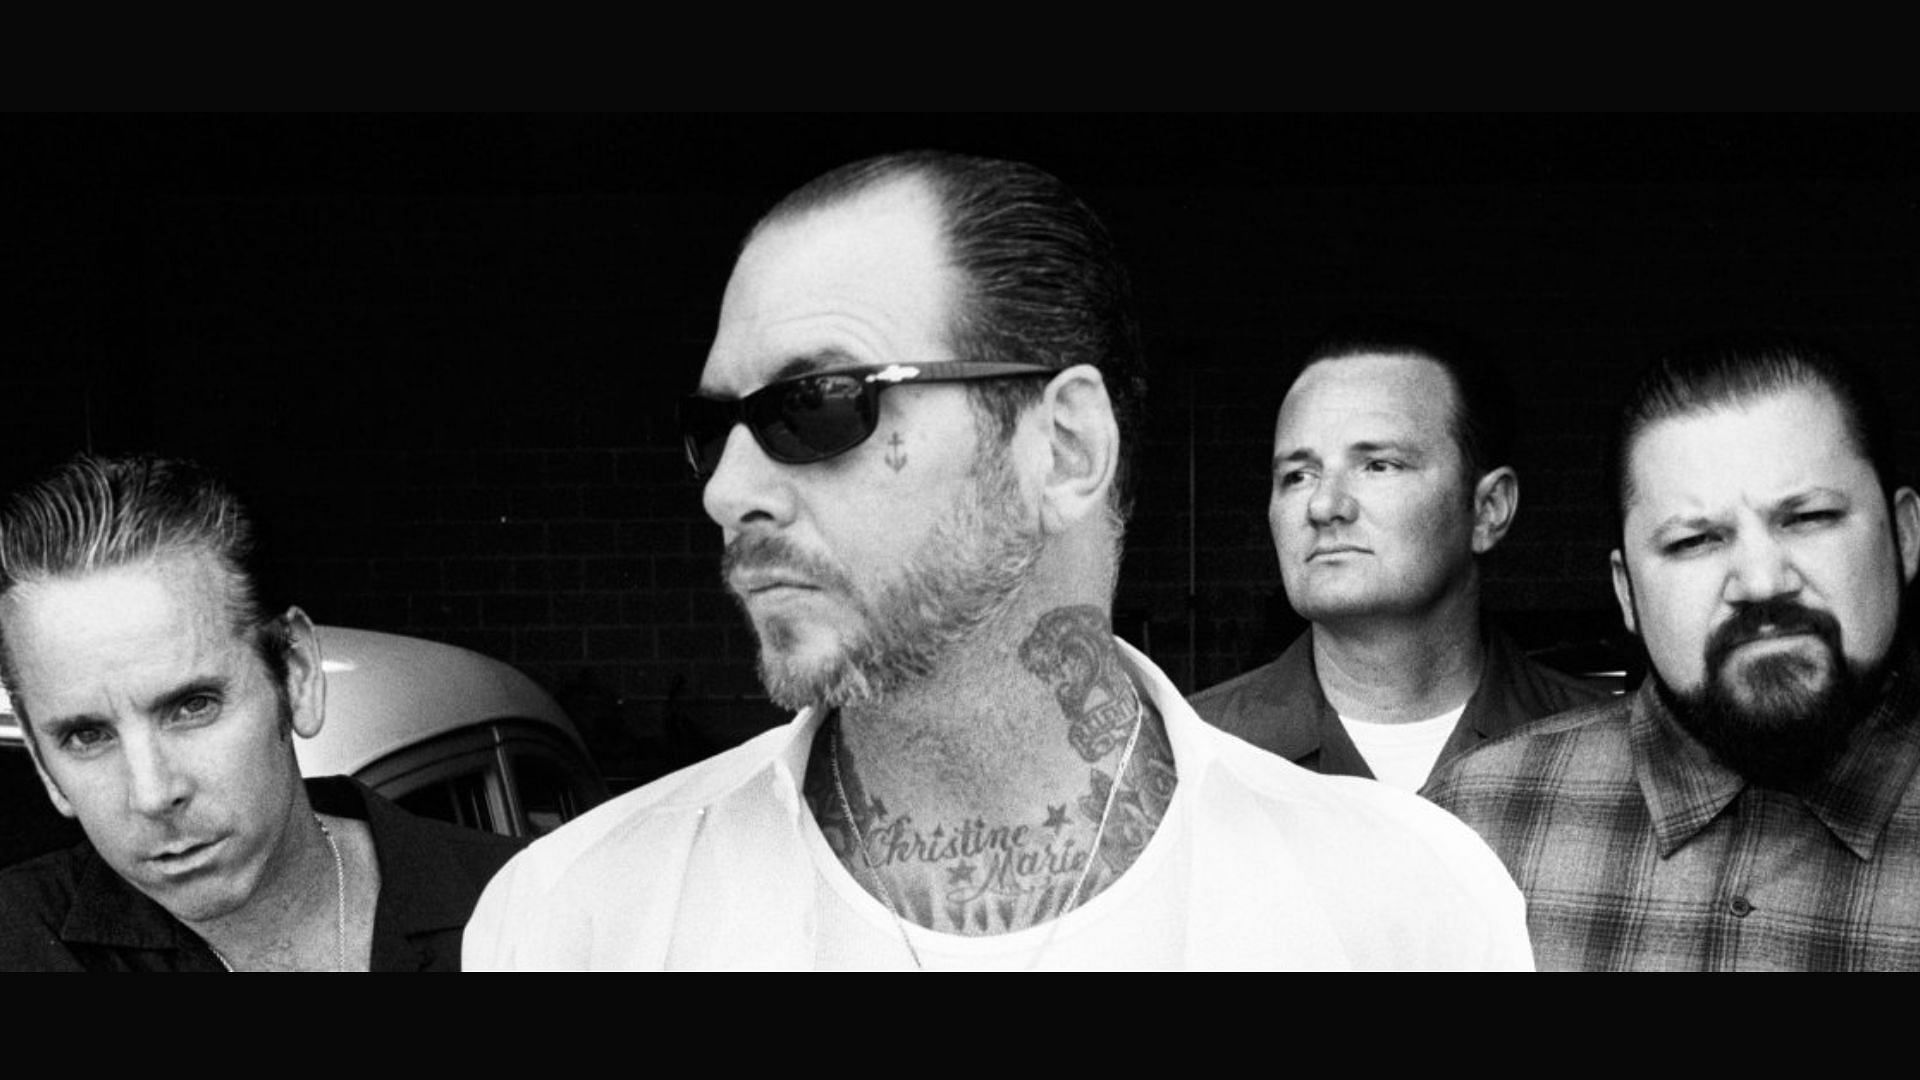 social distortion tour indonesia